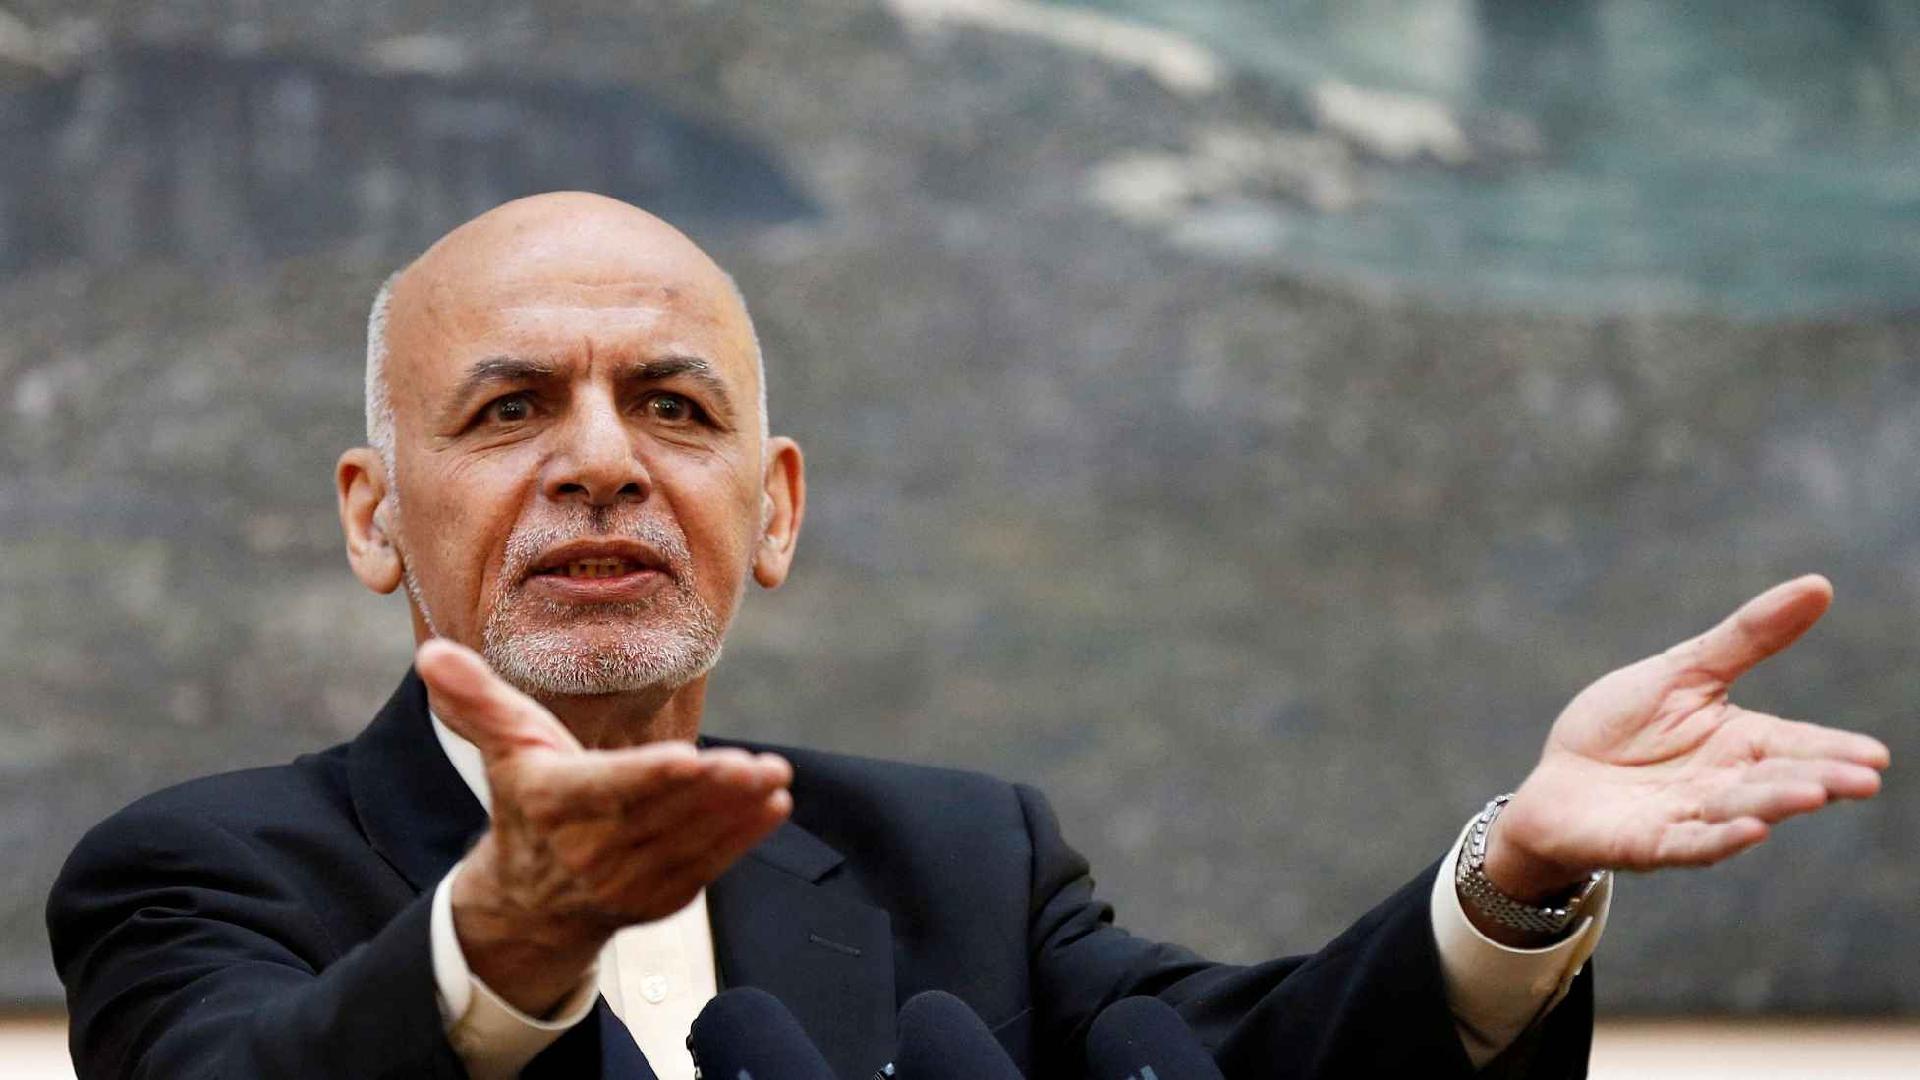 Afghan President Ghani leaves the country: TOLO News - CGTN